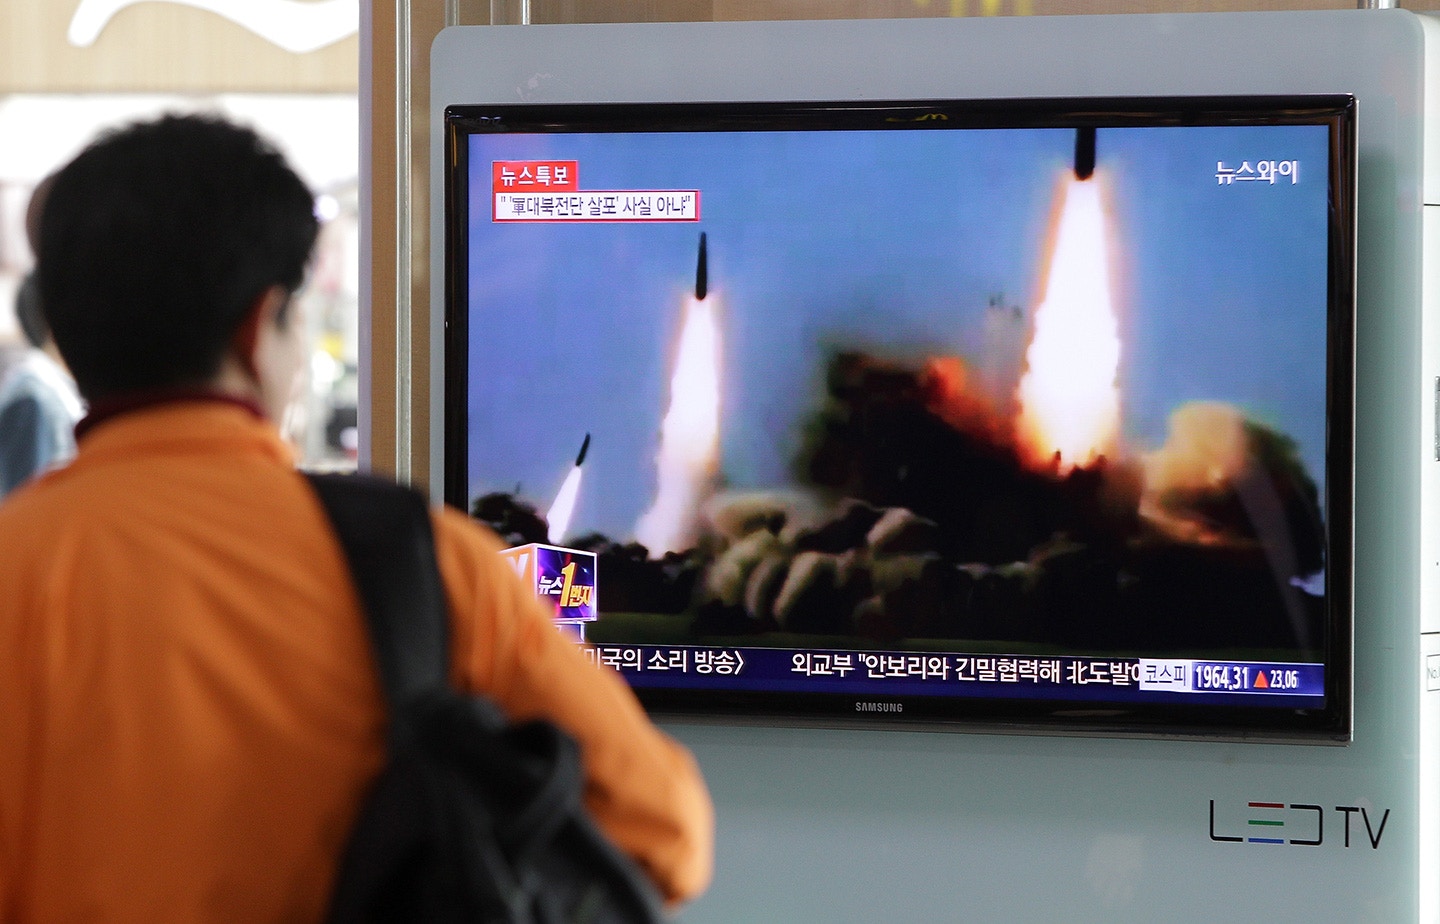 SEOUL, SOUTH KOREA - MARCH 26:  A Man watchs a television broadcast reporting the North Korean missile launch at the Seoul Railway Station on March 26, 2014 in Seoul, South Korea. North Korea test-launched two Nodong medium-range ballistic missiles into the sea off Korean peninsula's east coast on Wednesday morning, according to South Korea's defence ministry.  (Photo by Chung Sung-Jun/Getty Images)